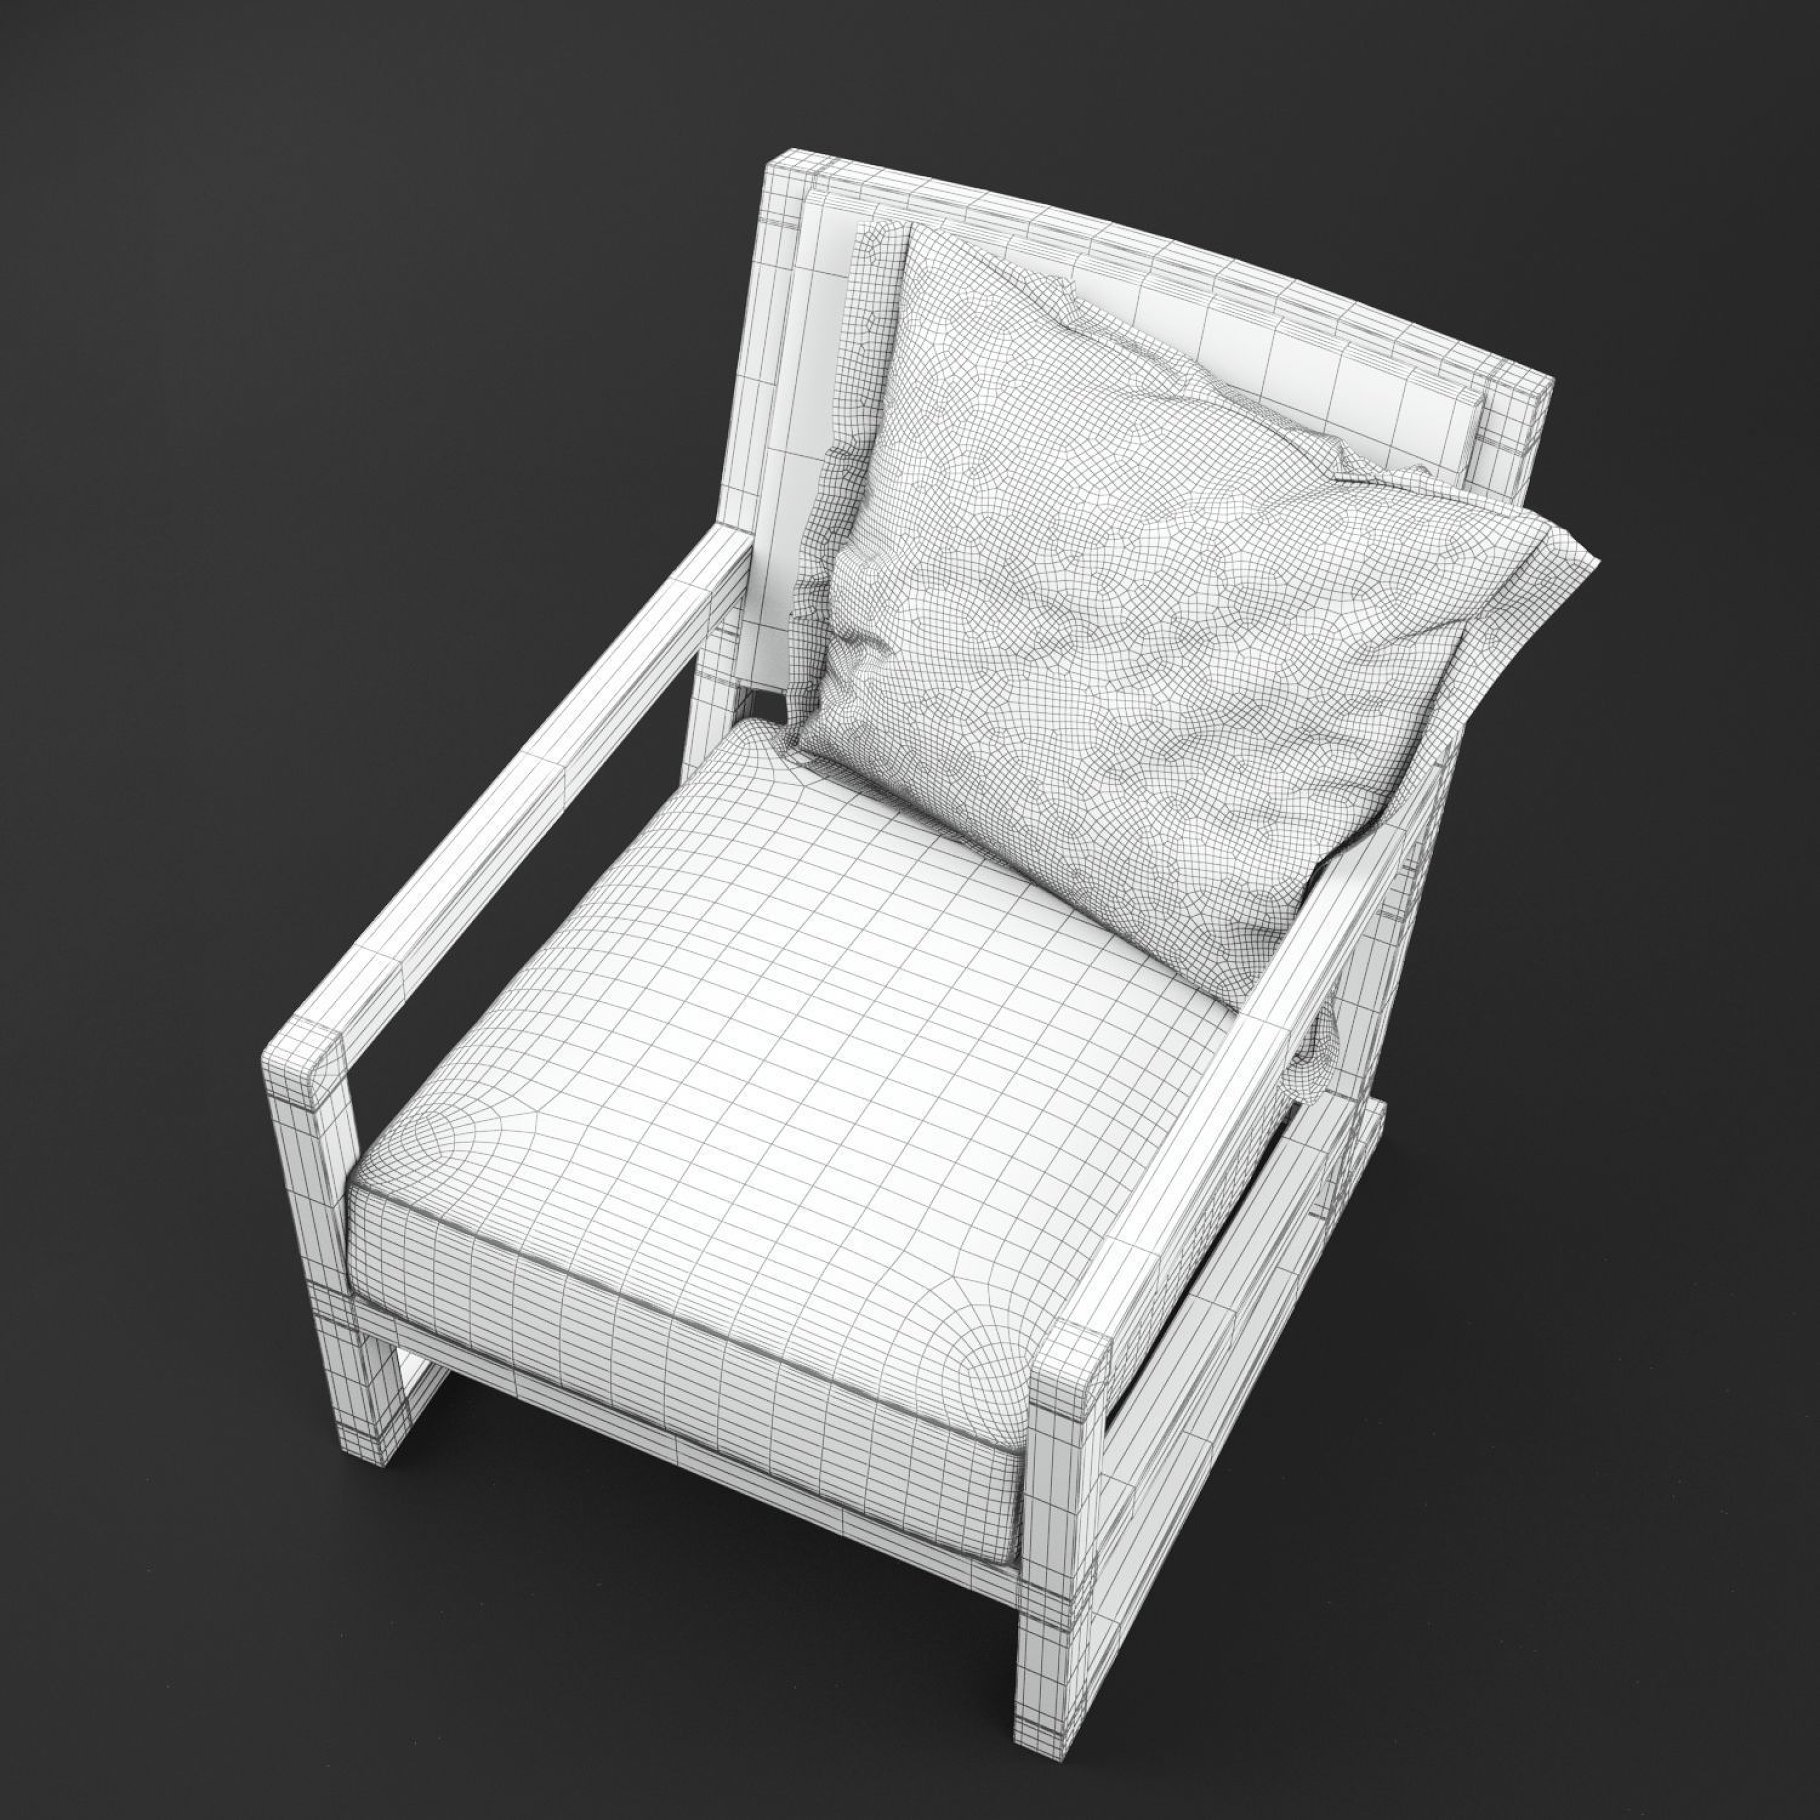 Rendering of an enchanting 3d model of an armchair without textures